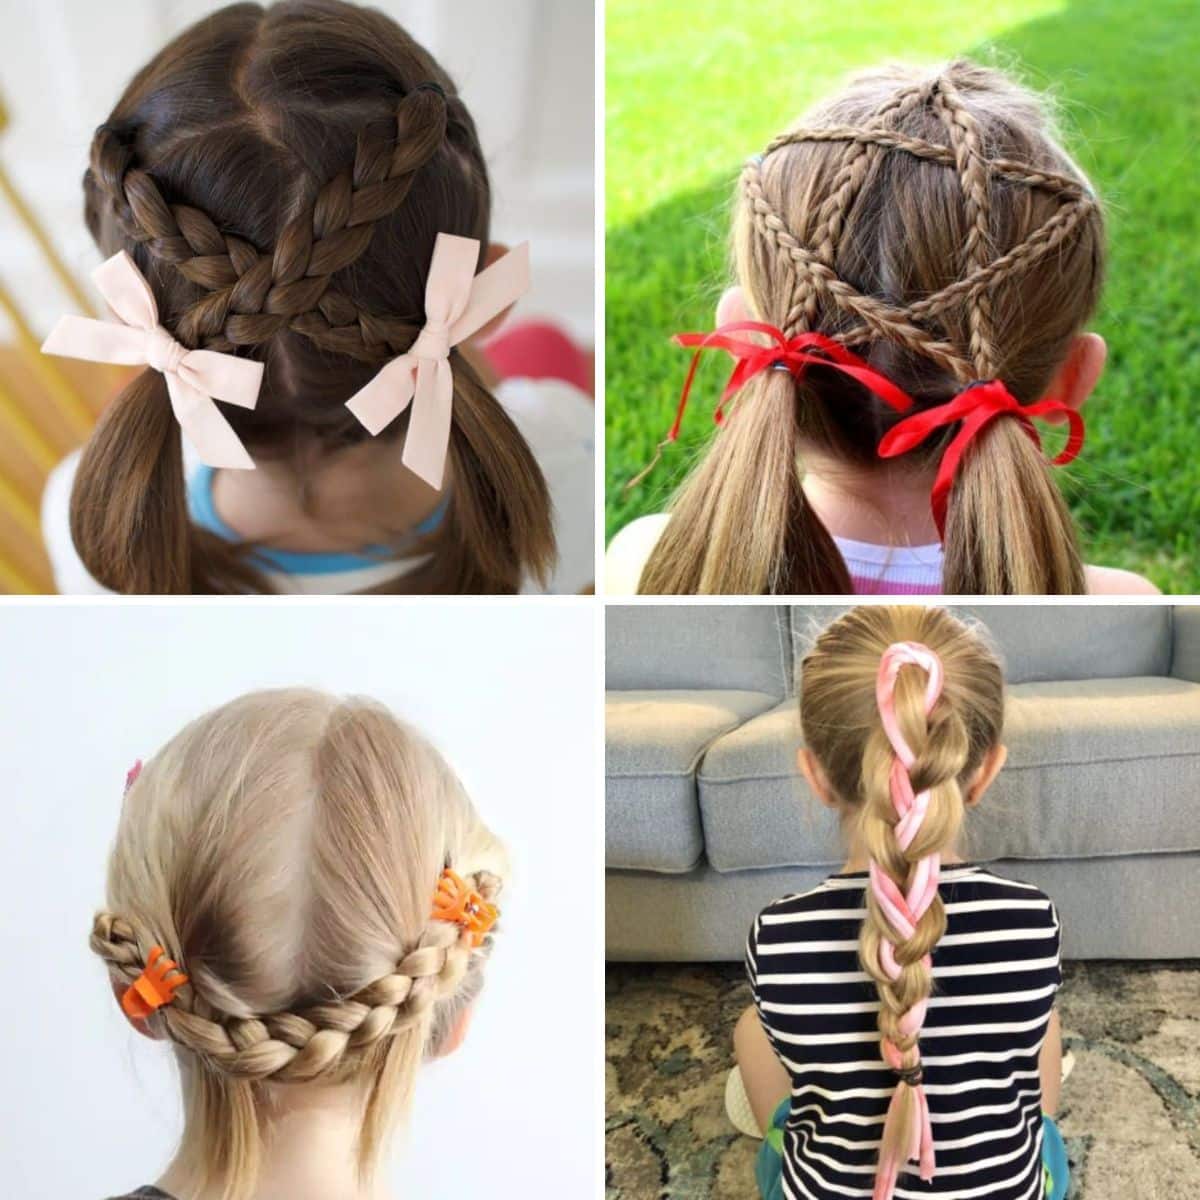 65 Easy And Cute Hairstyles That Can Be Done In Just A Few Minutes | Cute  simple hairstyles, Cute quick hairstyles, Simple wedding hairstyles